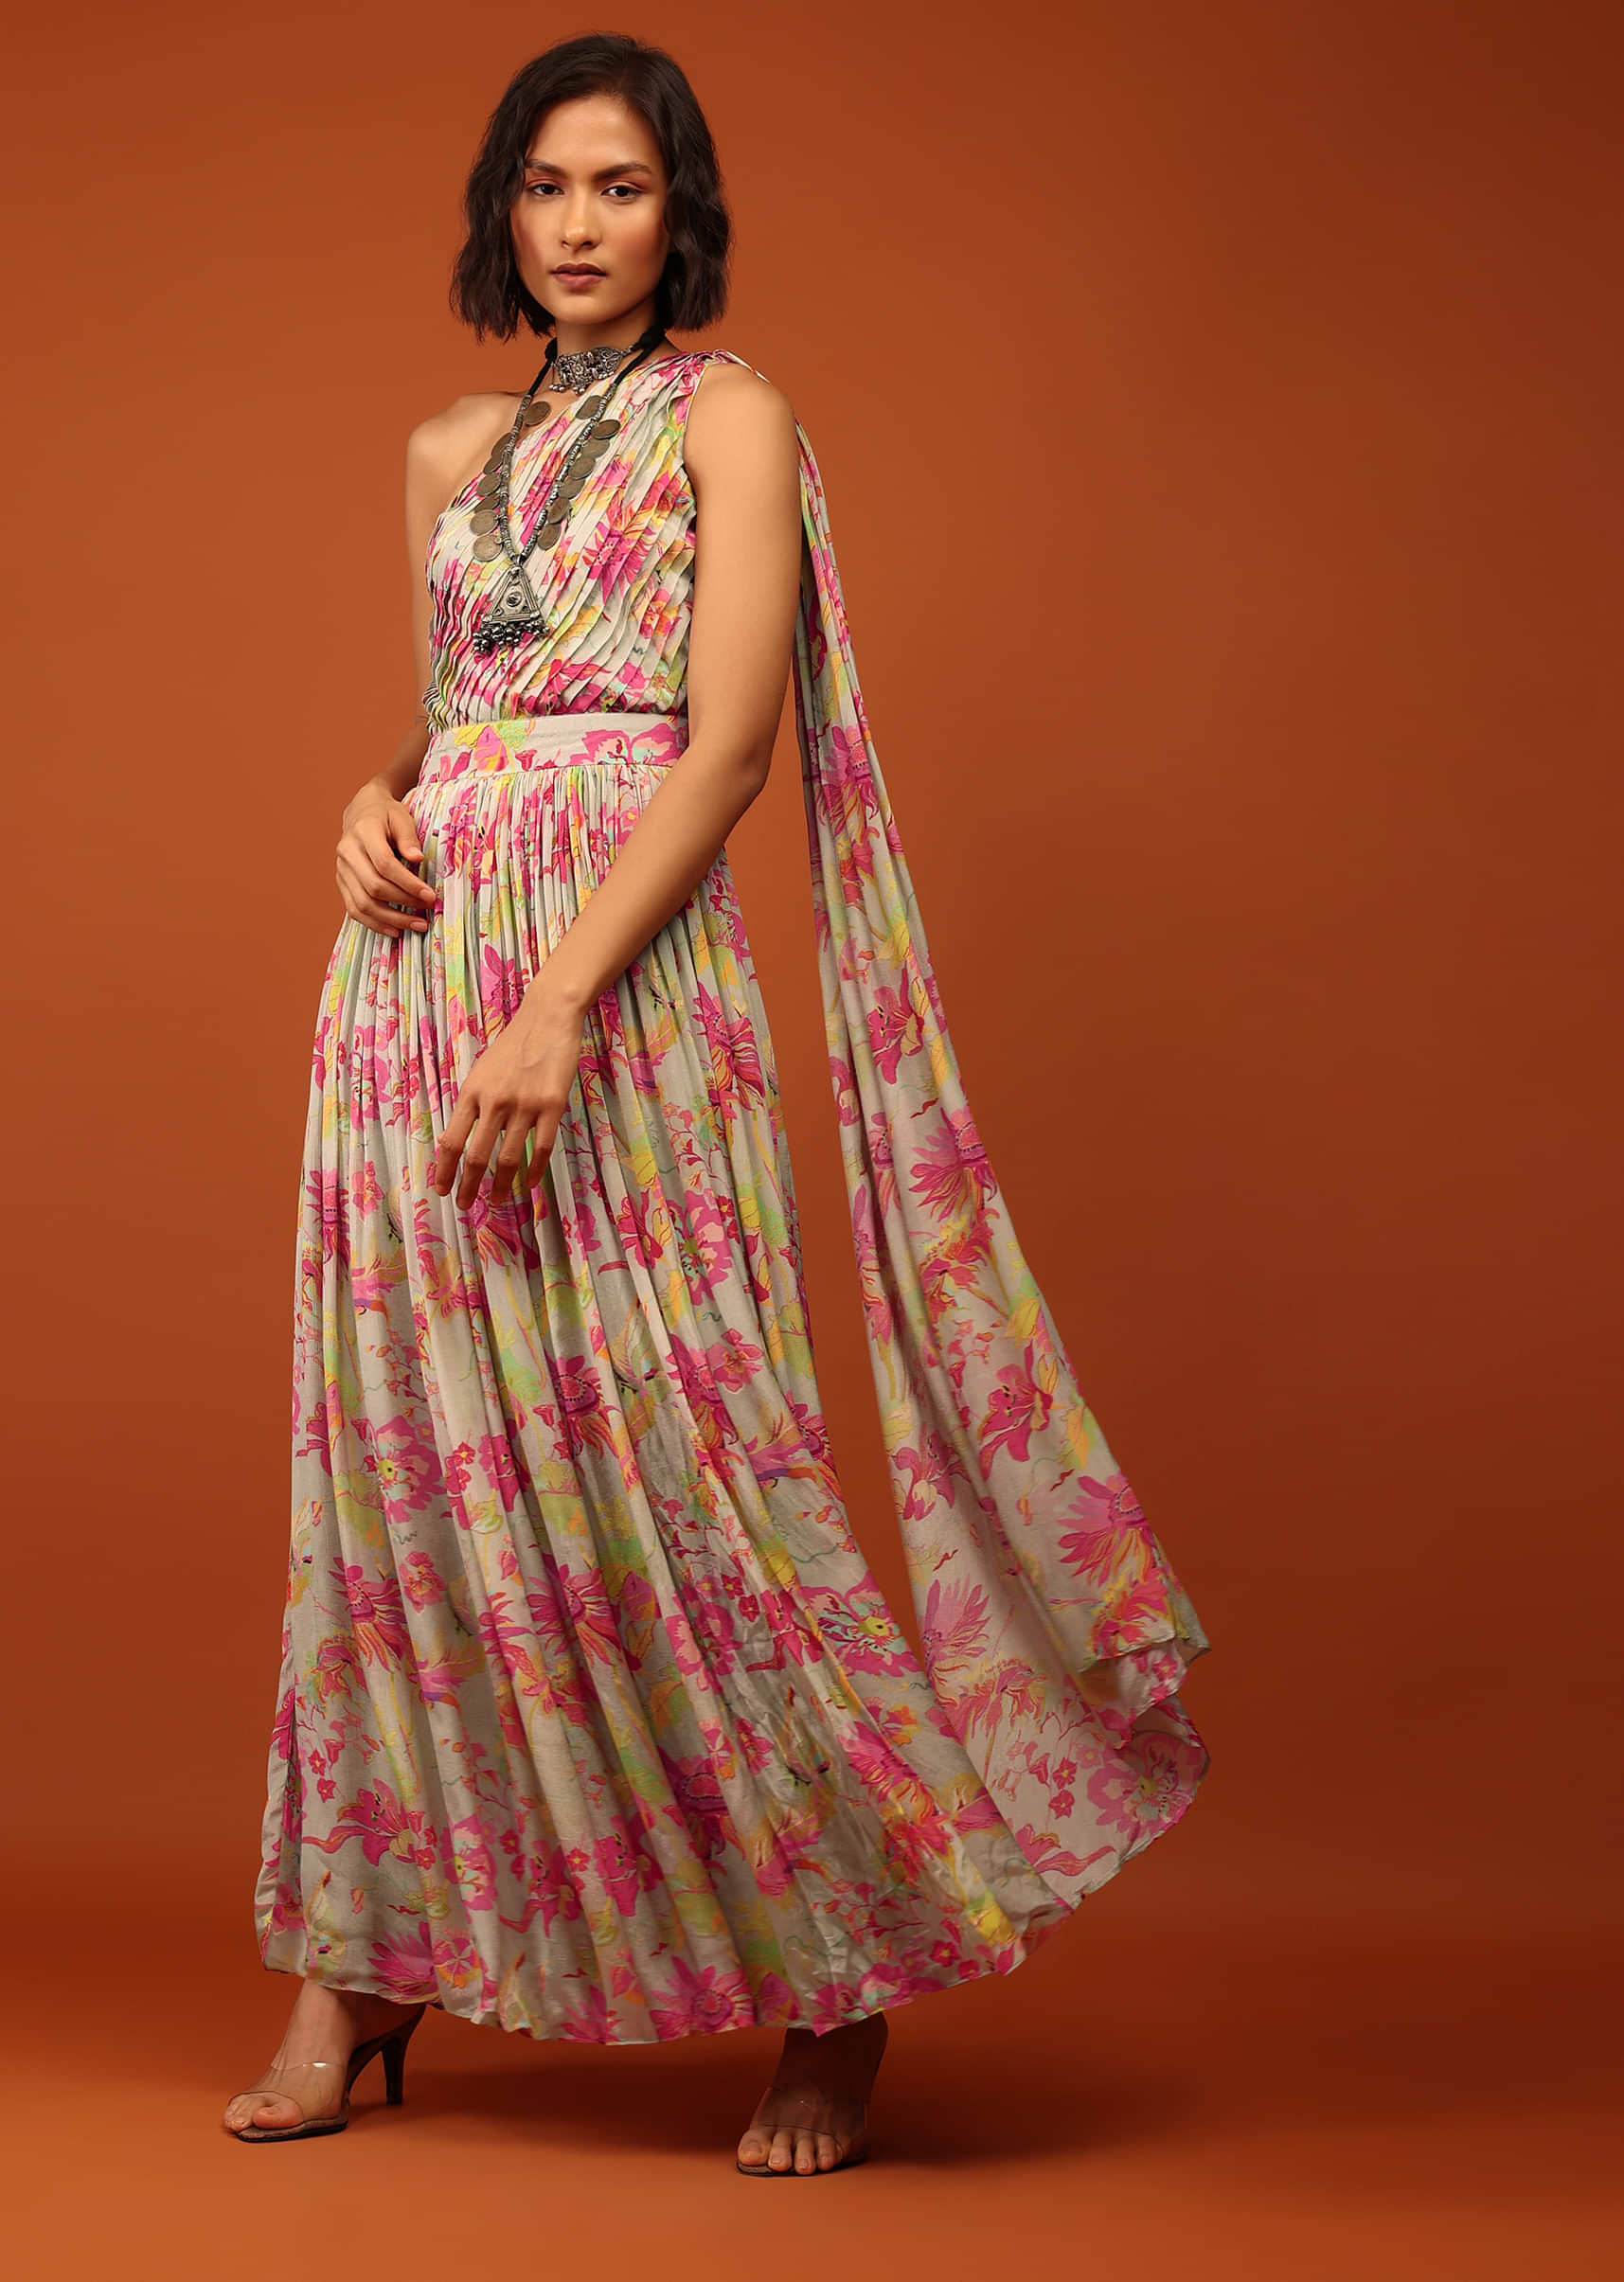 Moss Floral Print Jumpsuit With Slantly Pleated Bodice And Attached Drape On The Shoulder